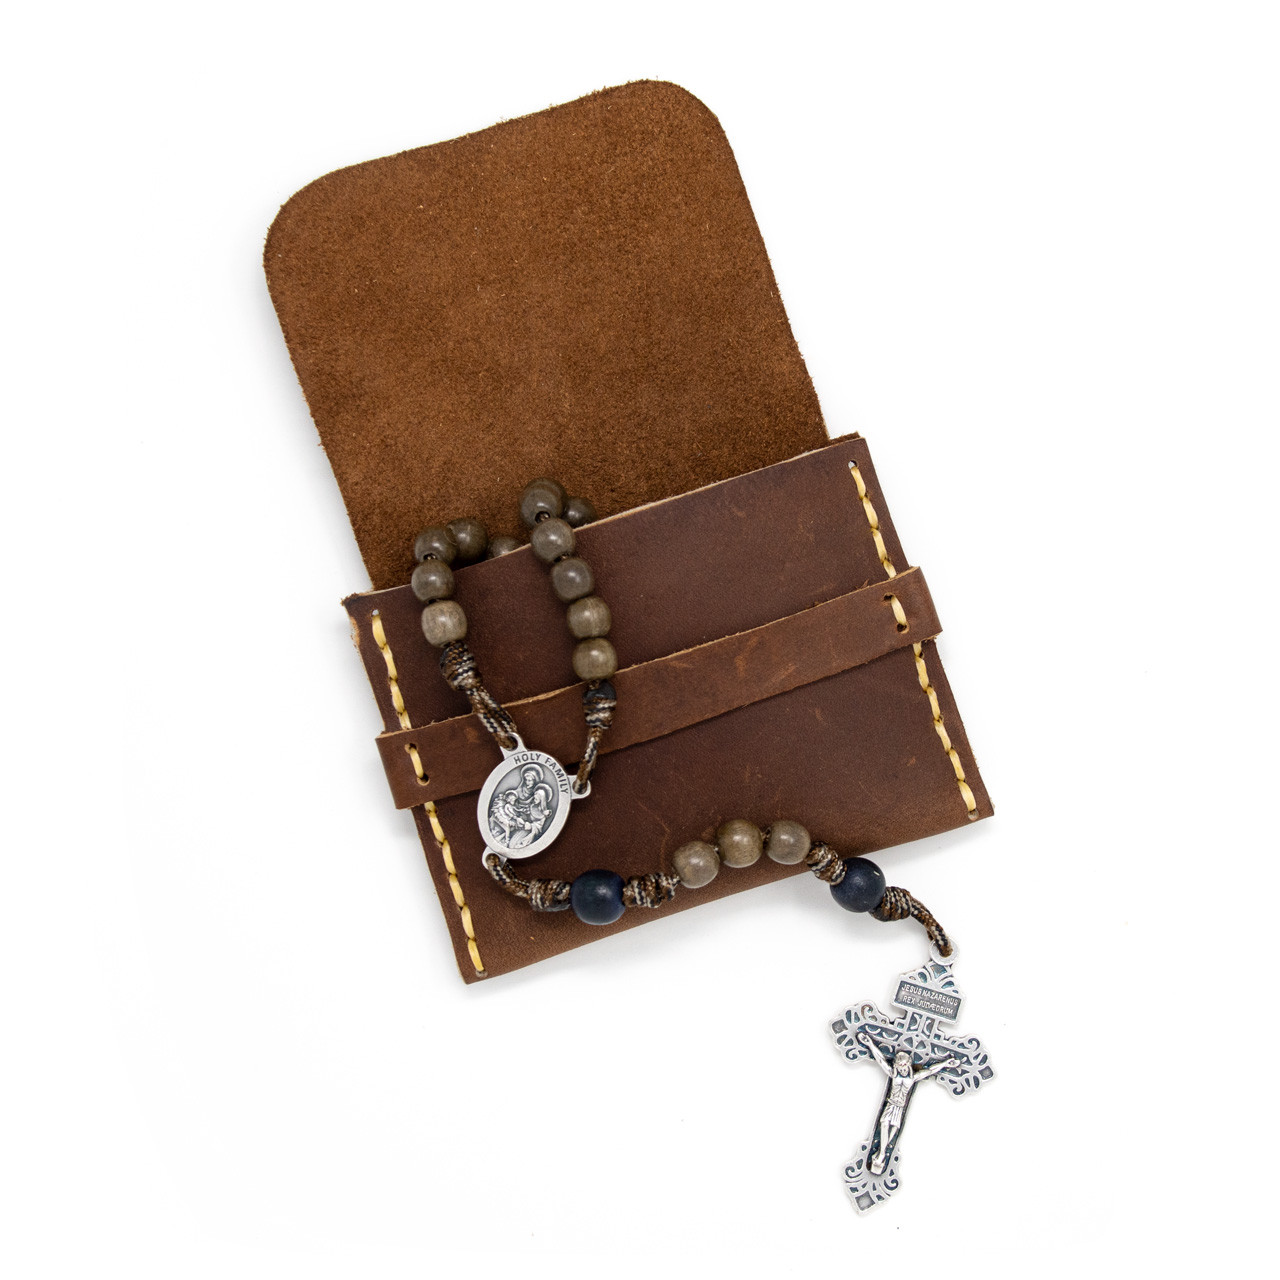 Our Lady of Lourdes Rosary Pouch – The Catholic All Year Marketplace